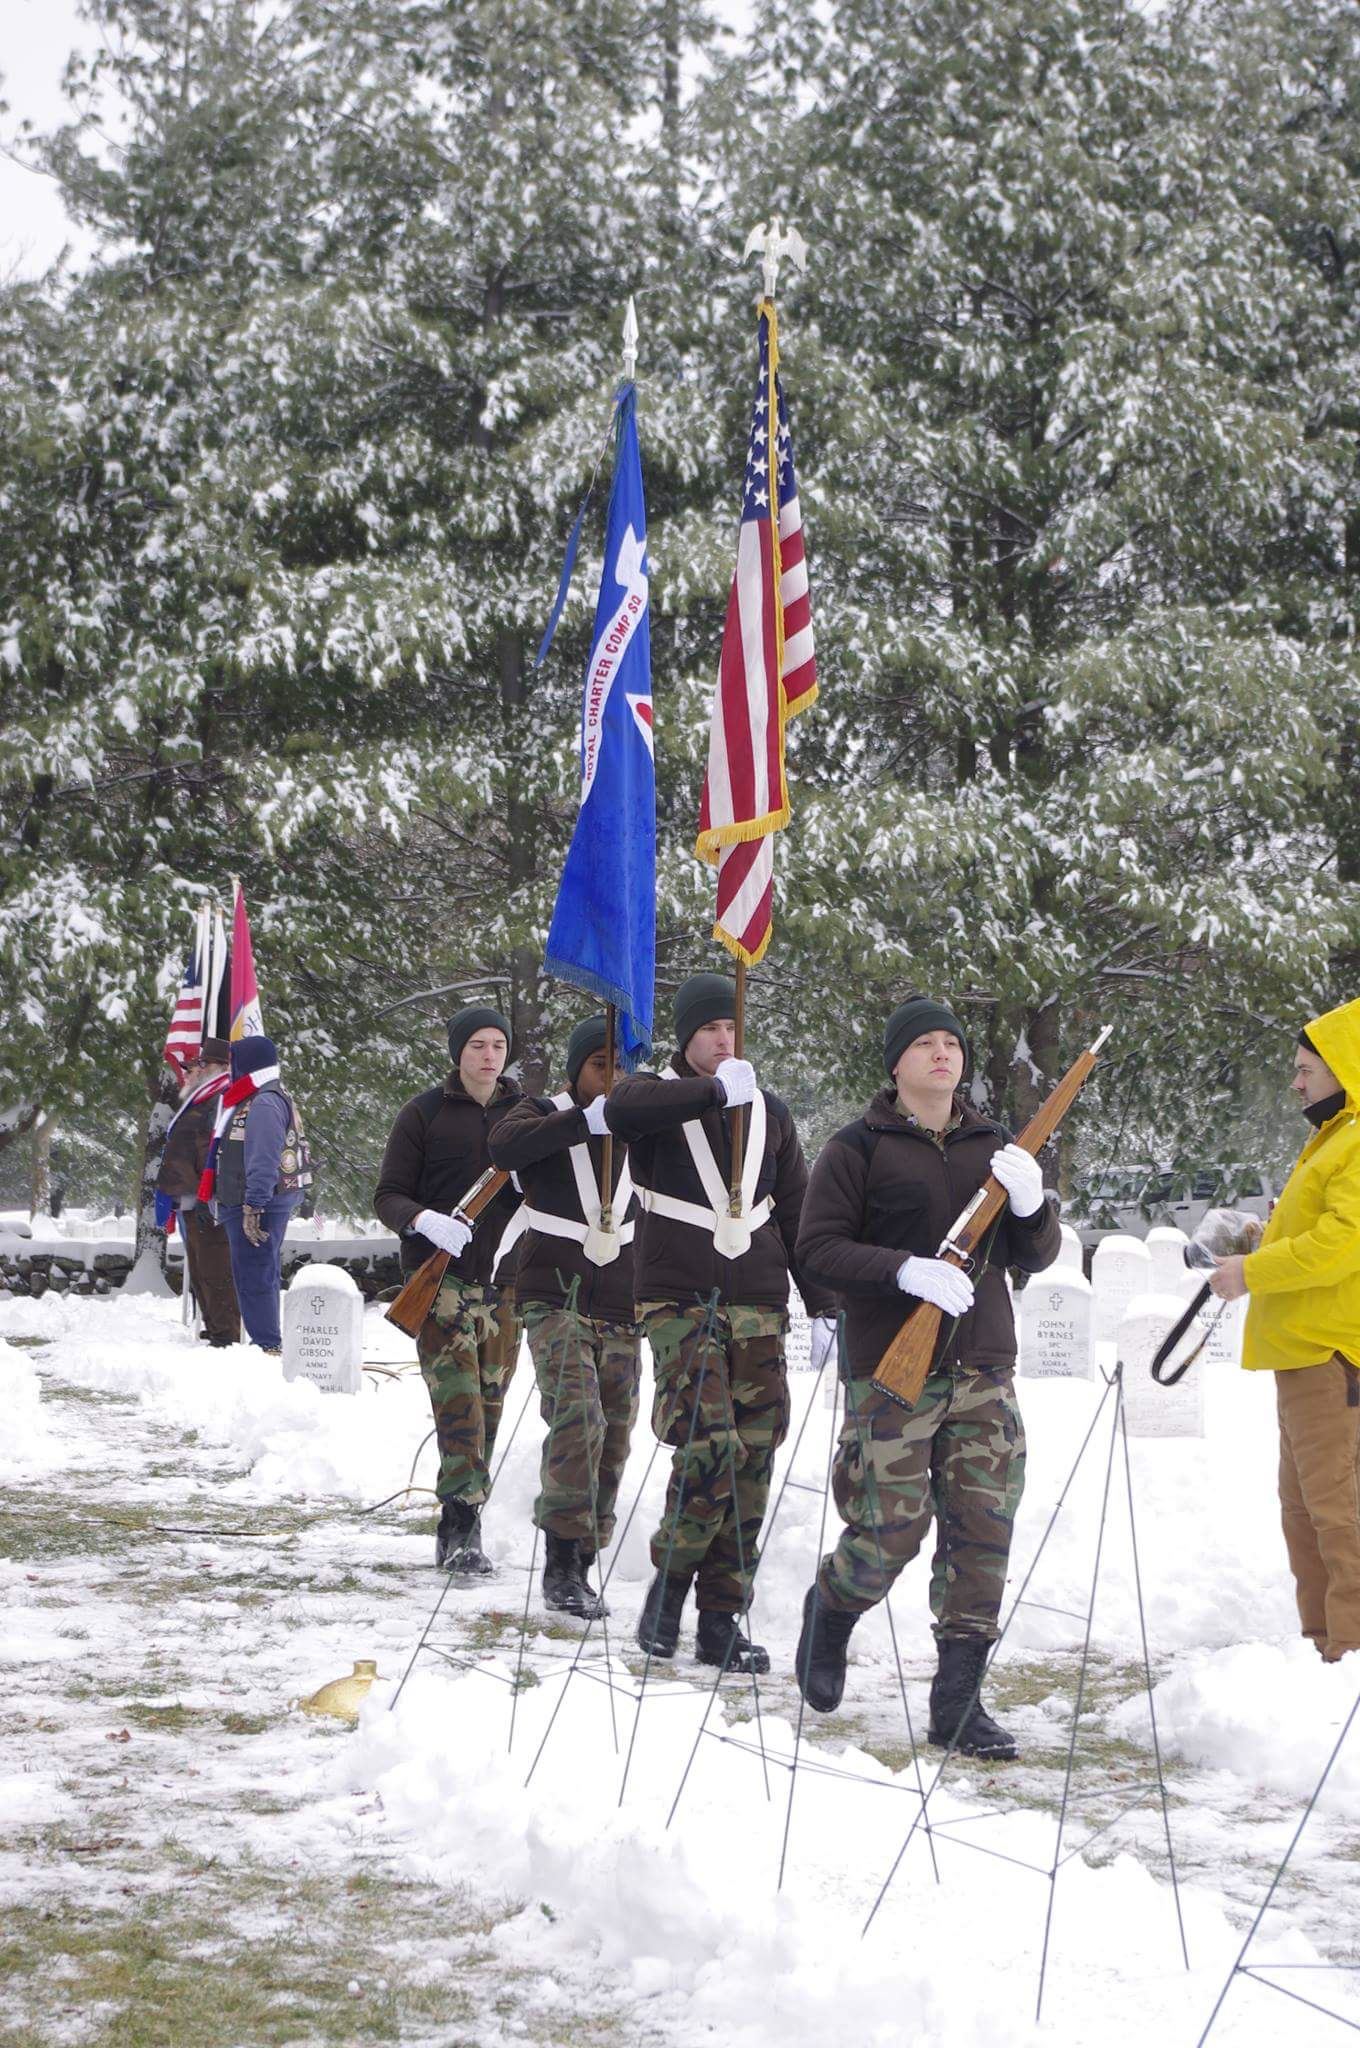 Royal Charter Composite Squadron, Civil Air Patrol, US Air Force Auxiliary Cadet Color Guard posts Colors at the State Veterans Cemetery in Middletown on December 17, 2016